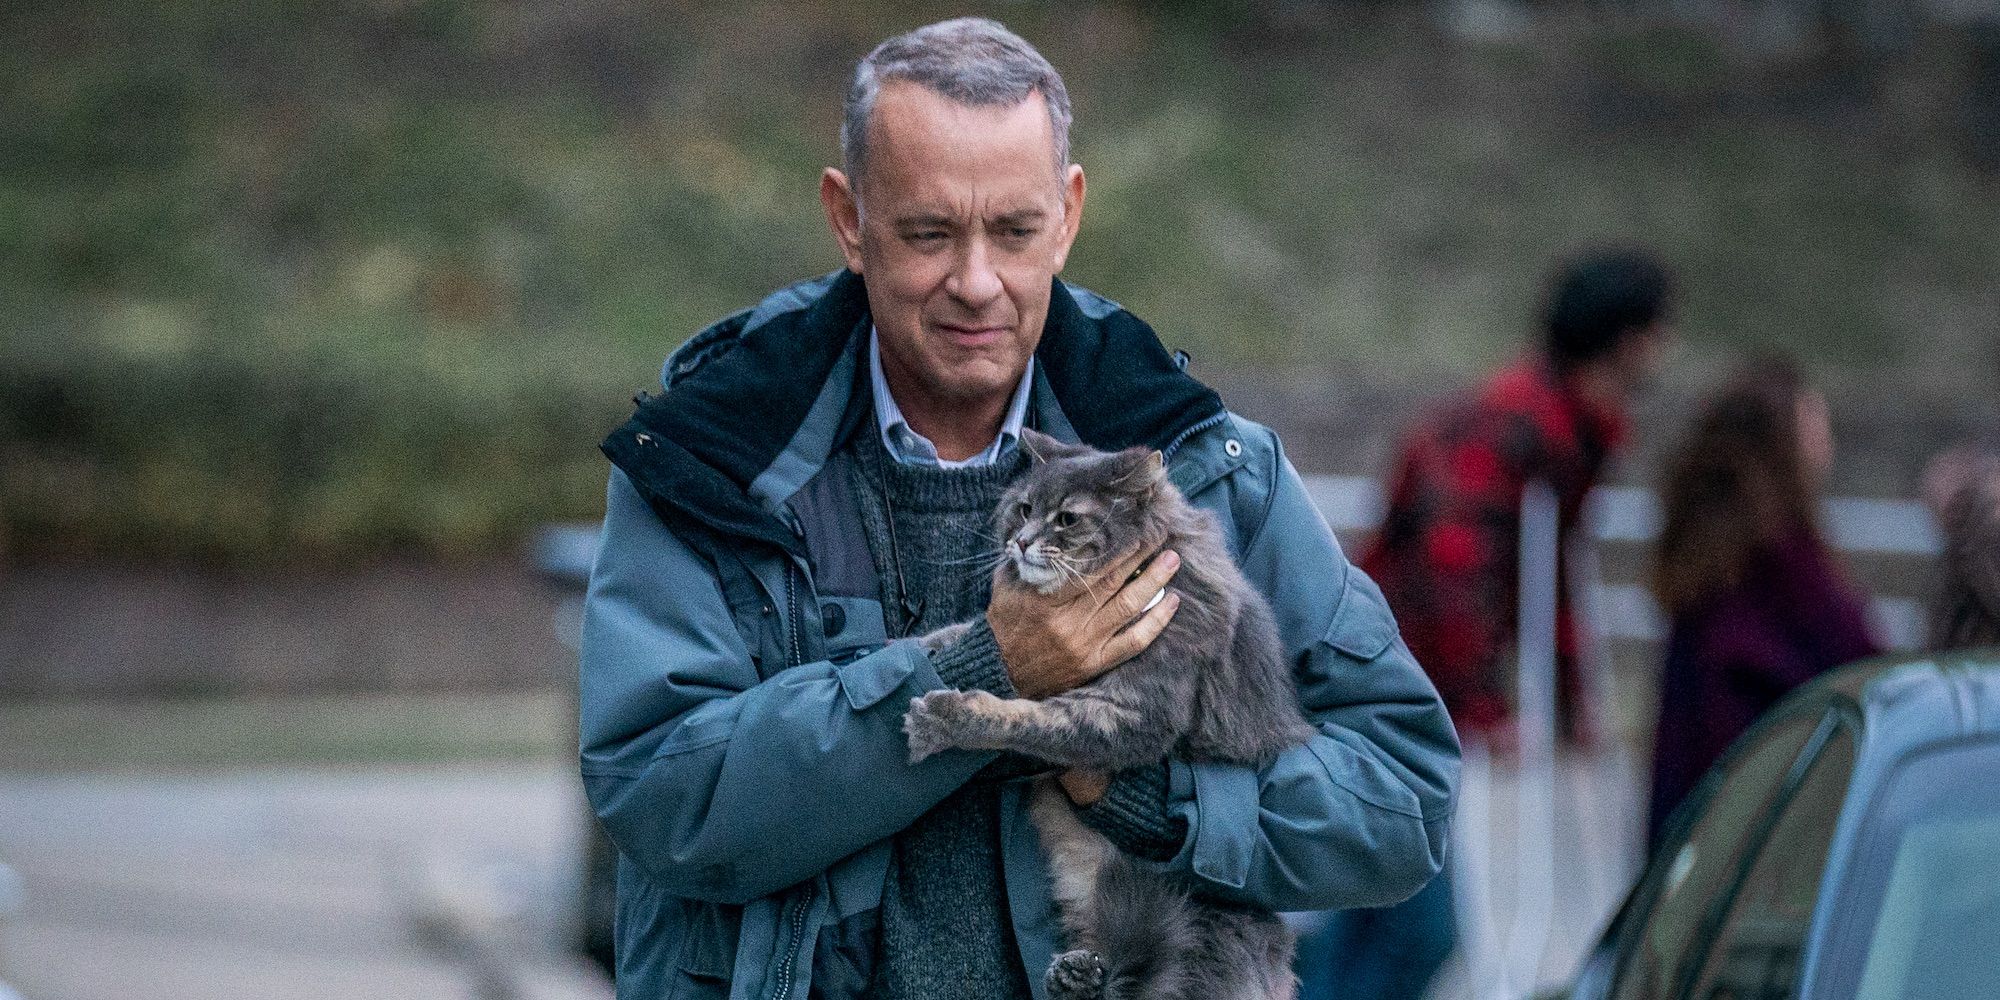 Tom Hanks smiling and holding a cat in A Man Called Otto